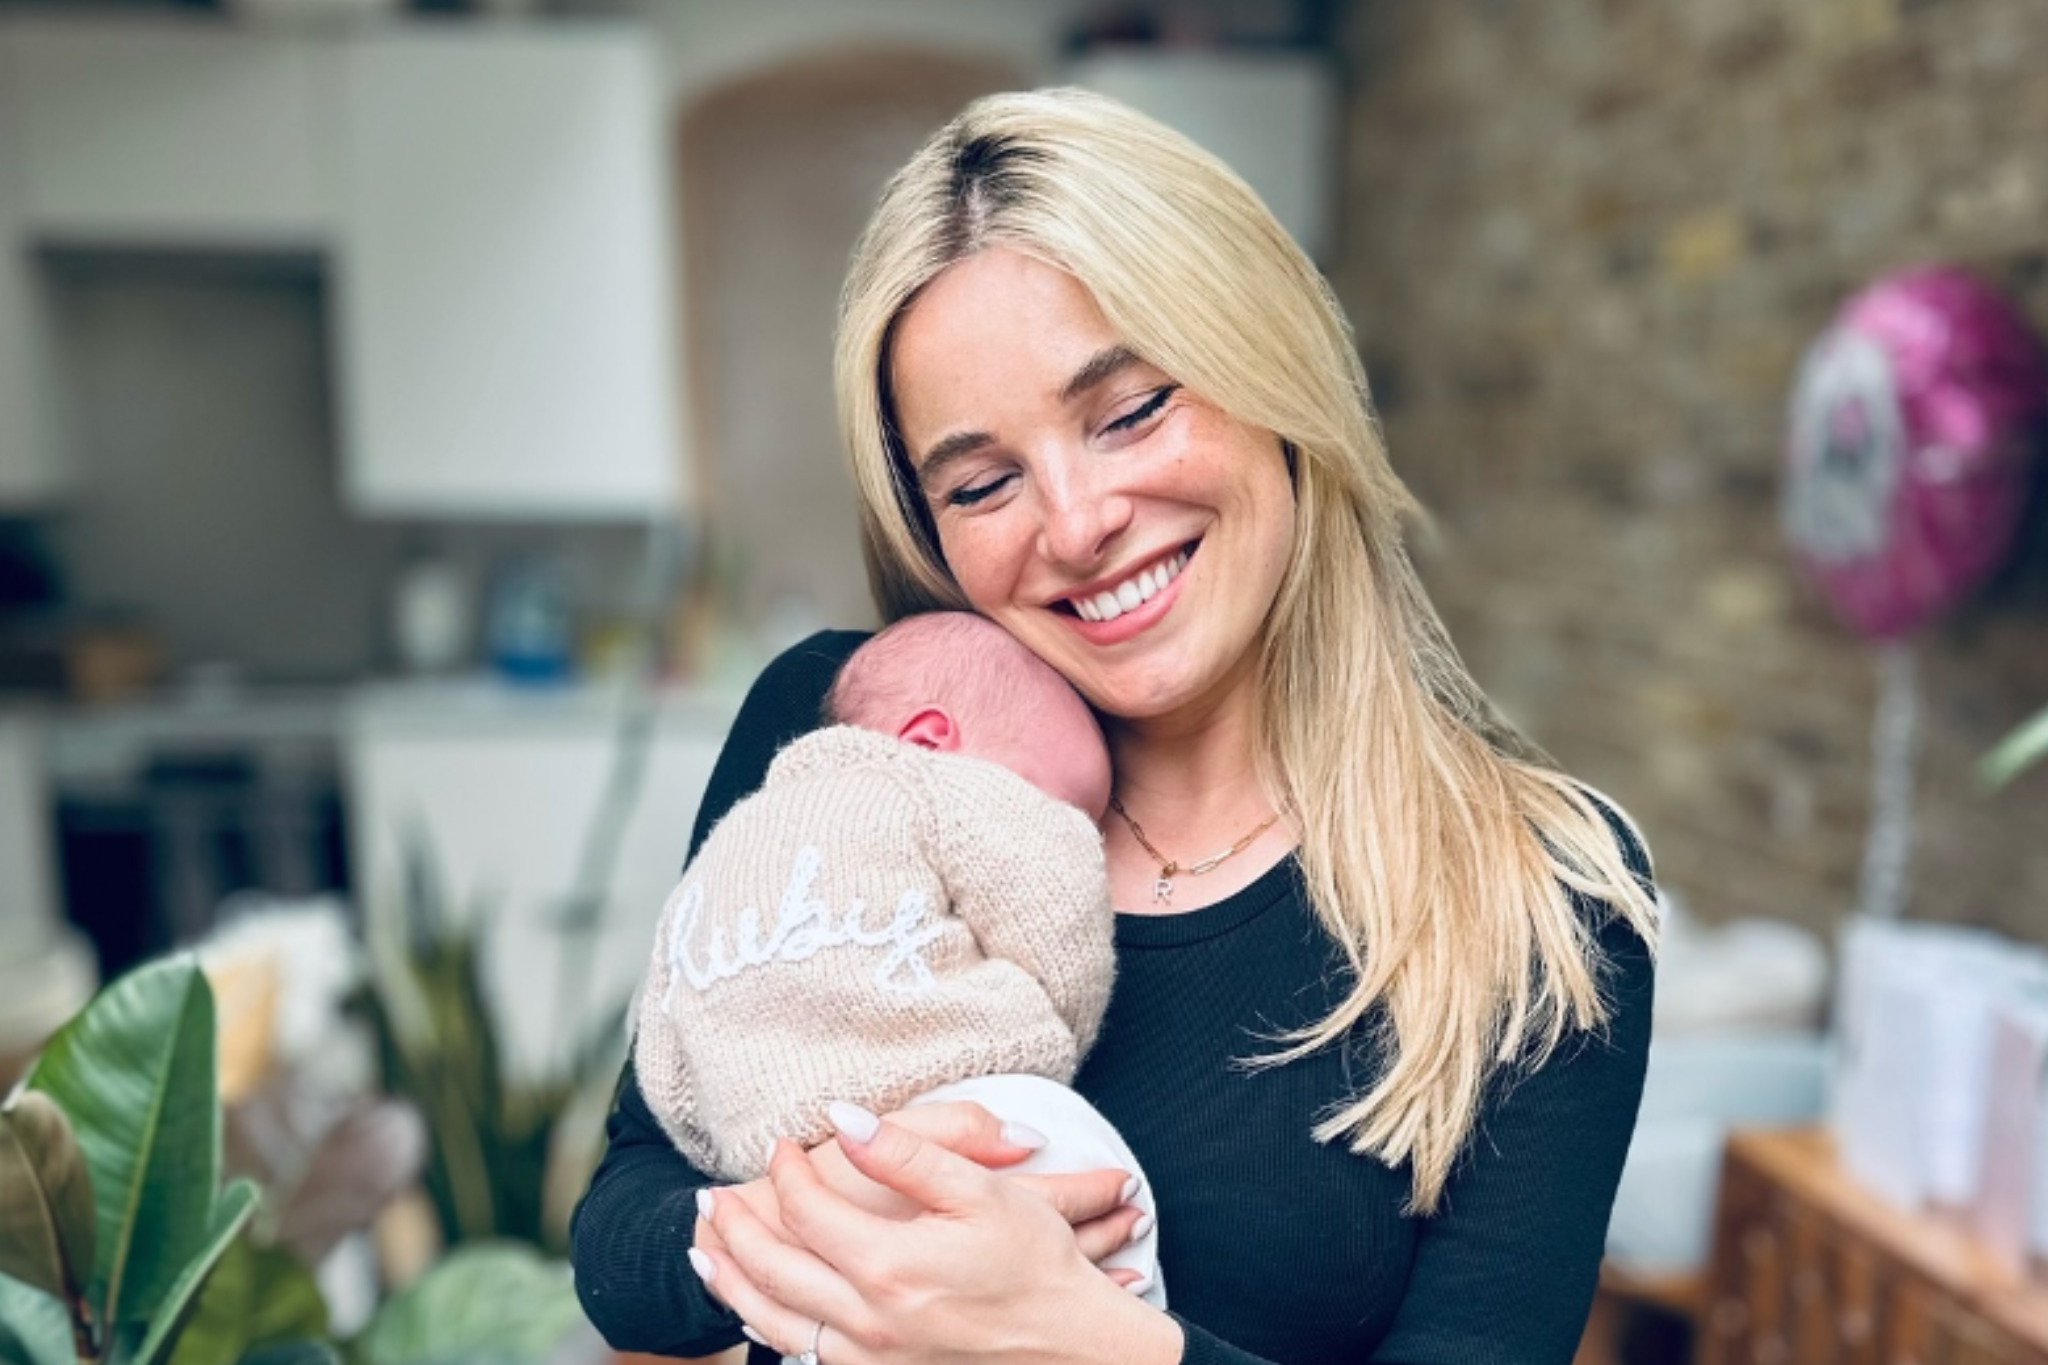 this morning, roman kemp, capital radio, this morning star sian welby gives birth to first child